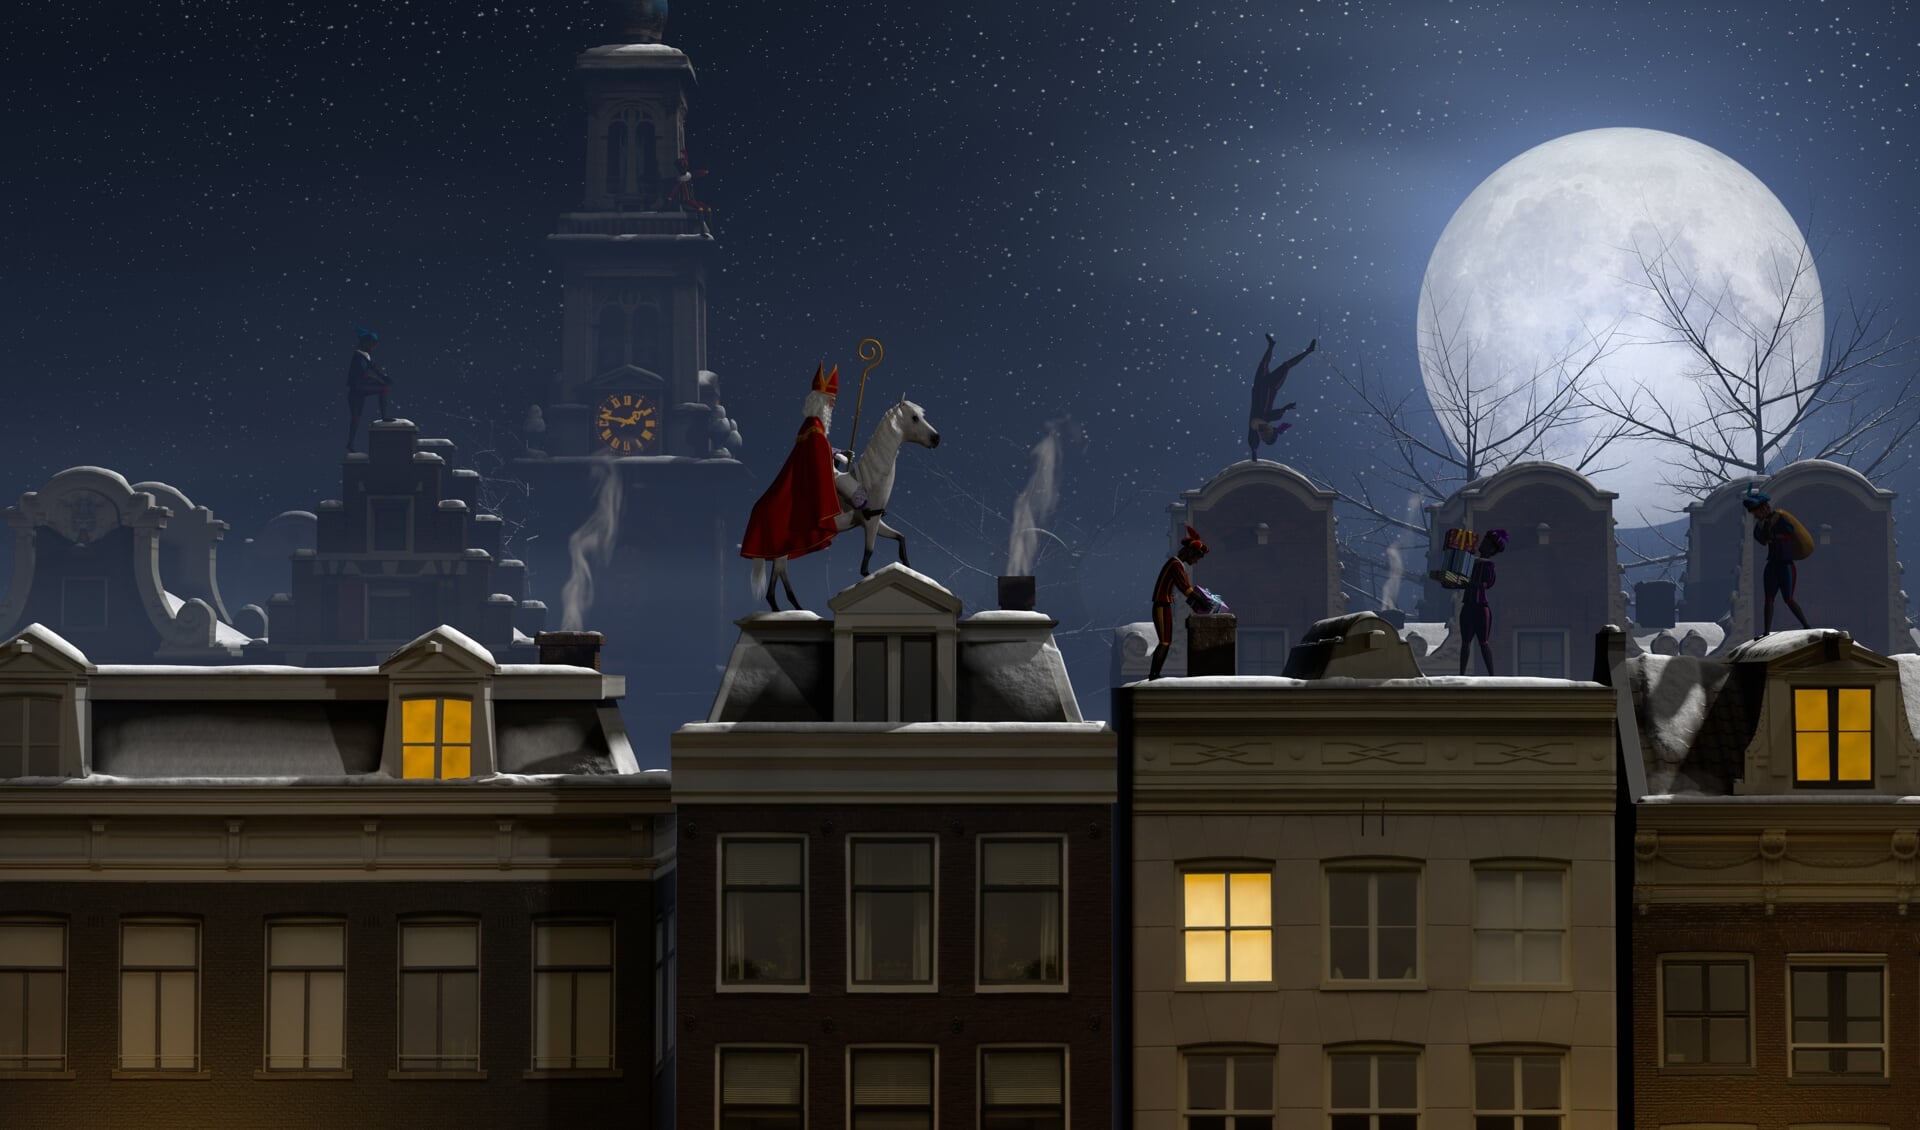 Sinterklaas and the Pieten on the rooftops at night, a scene for the traditional Dutch holiday 'Sinterklaas', 3d render.